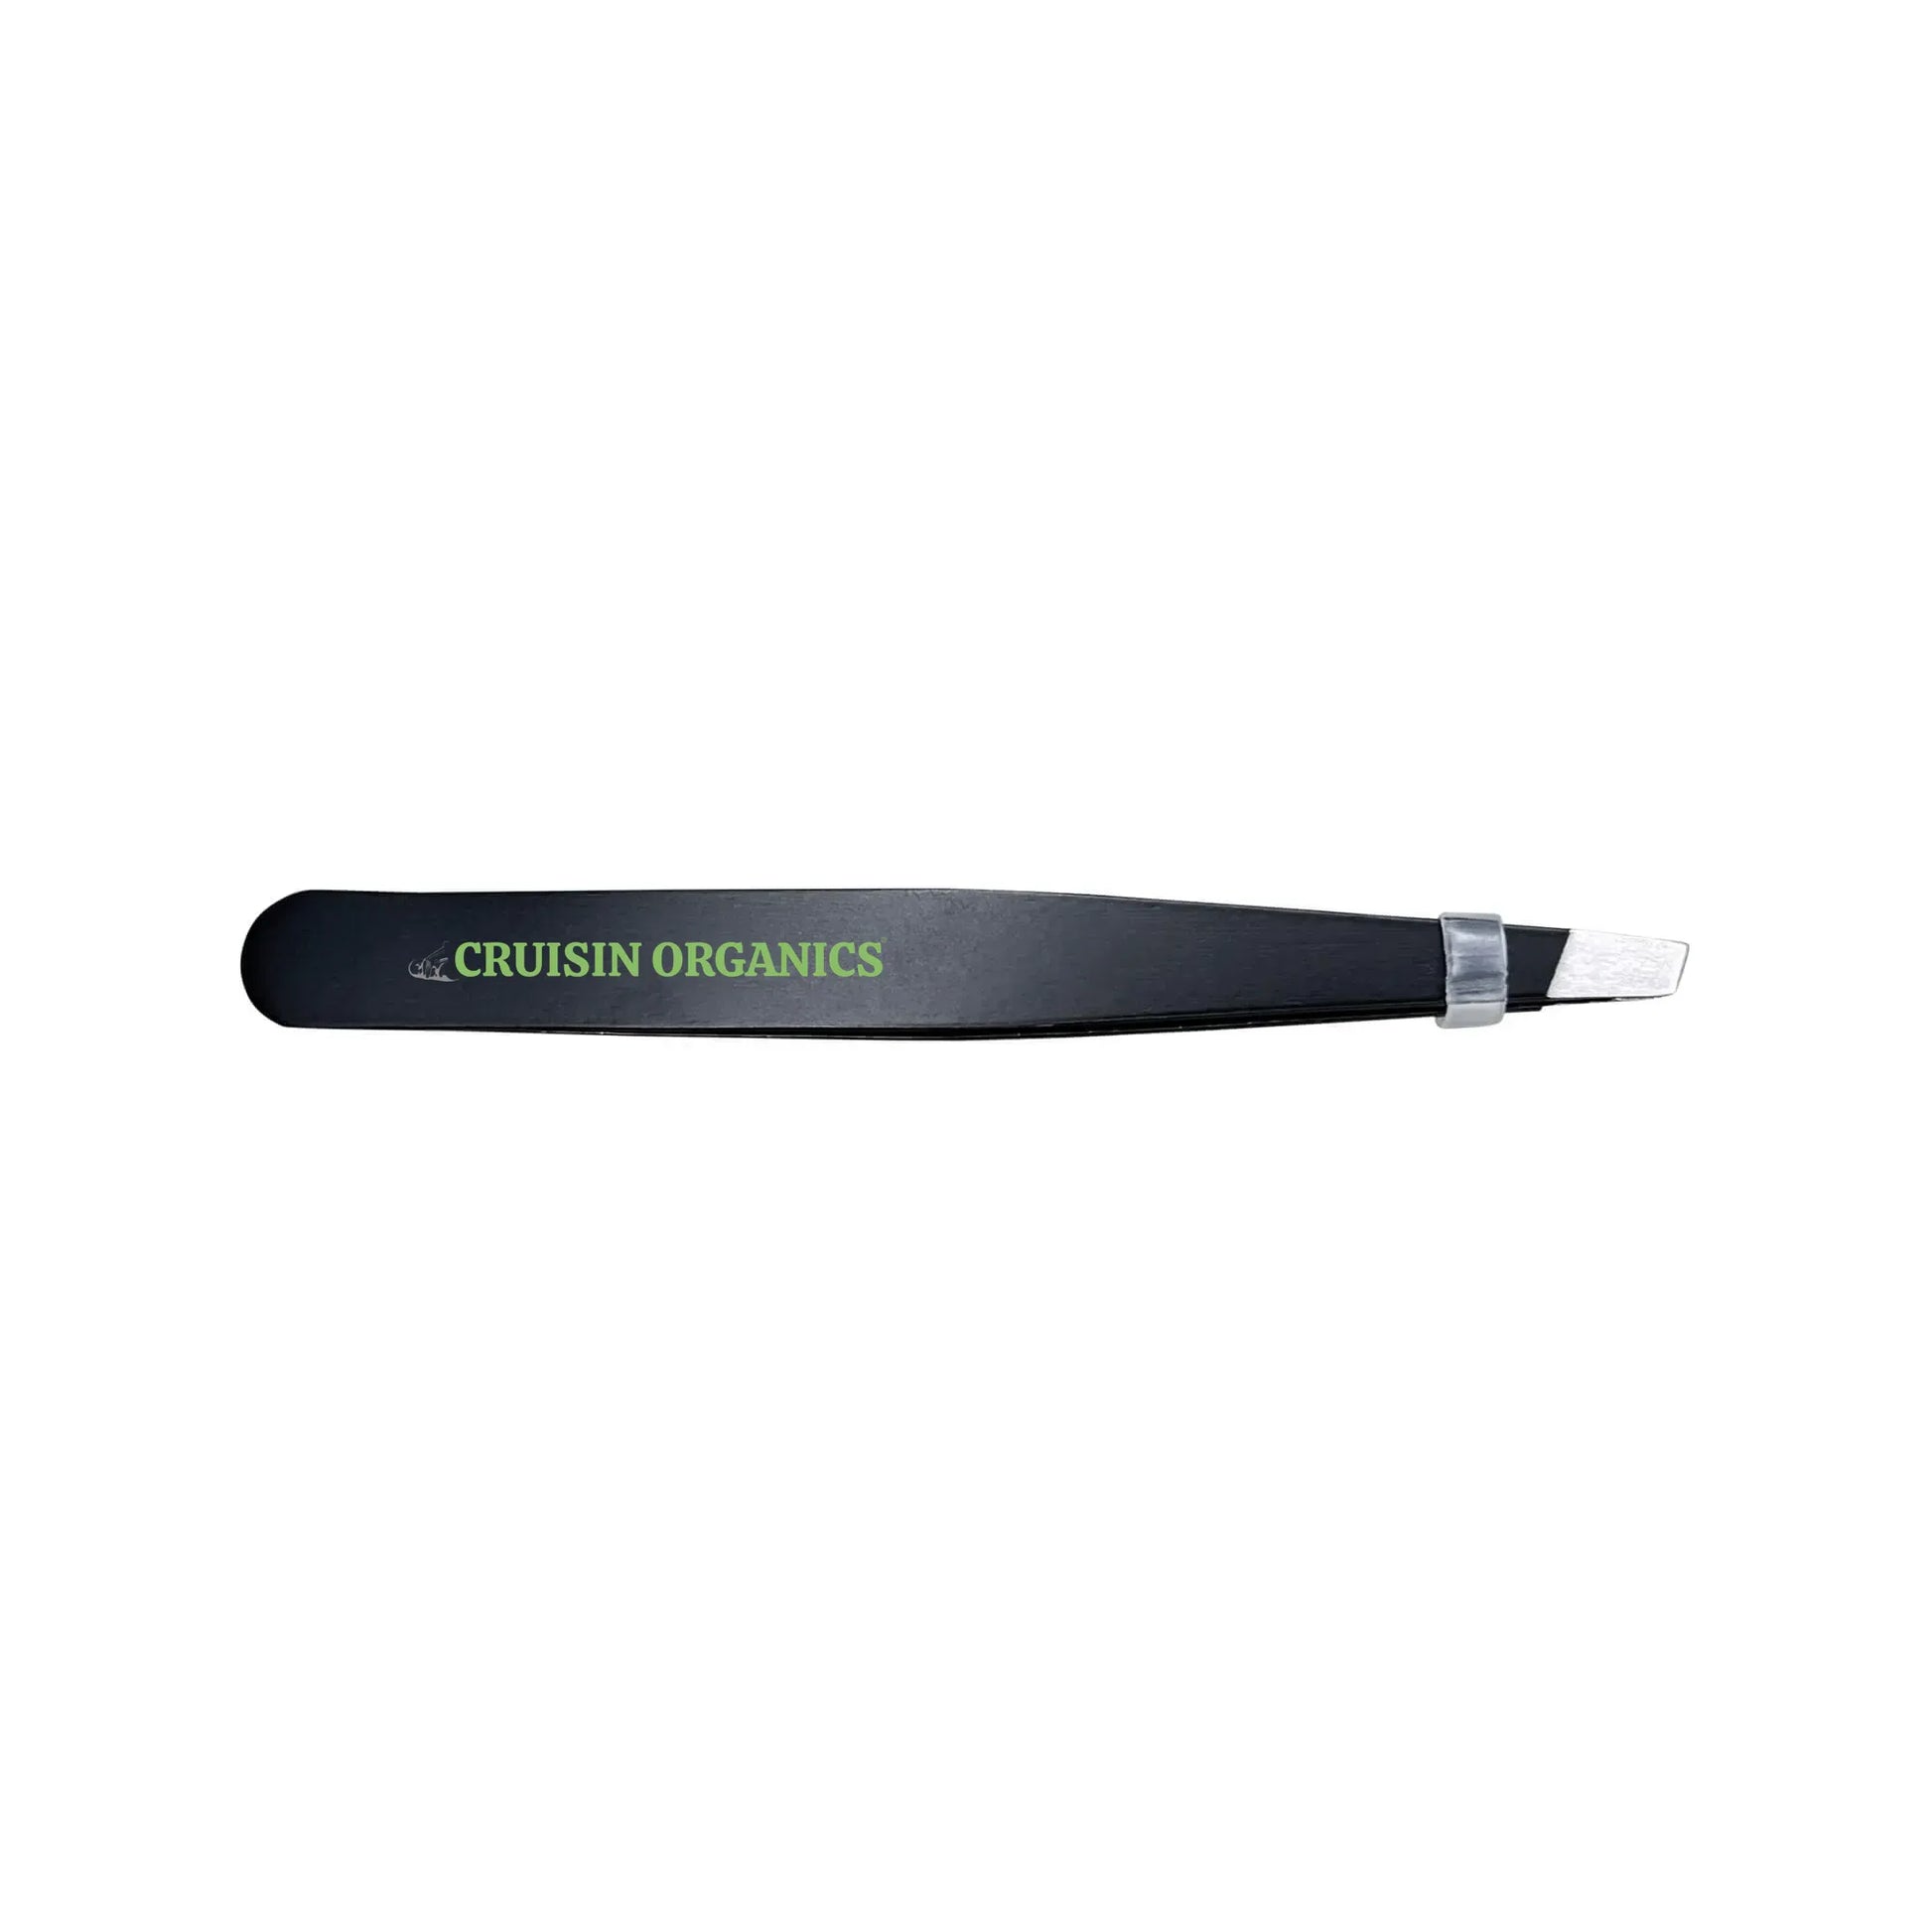 Discover the power of our Cruisin Organics precision tweezers to define and shape your brows. This tweezer is uniquely designed to easily remove stubborn hairs and ingrown hairs with precision technology. The perfectly slanted tip allows for precise work along the brow bone, creating a flawless brow look. You'll never miss a hair with these high-quality Precision Tweezers!